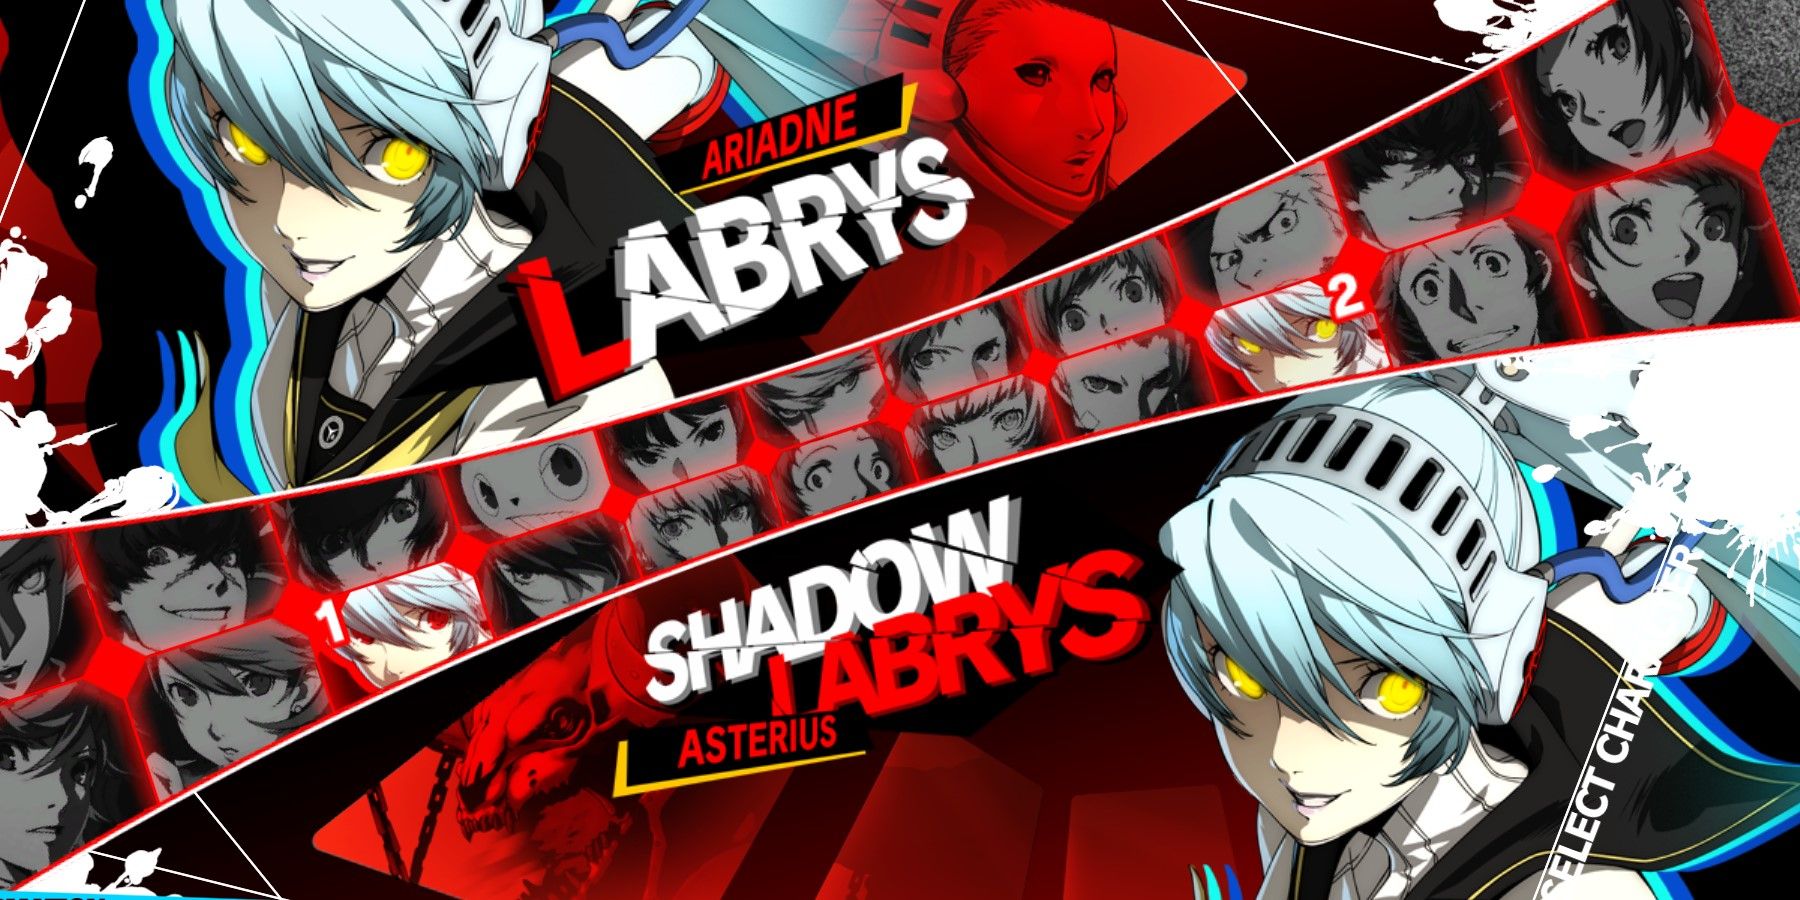 Shadow Type Labrys vs Shadow Labrys in the character select screen